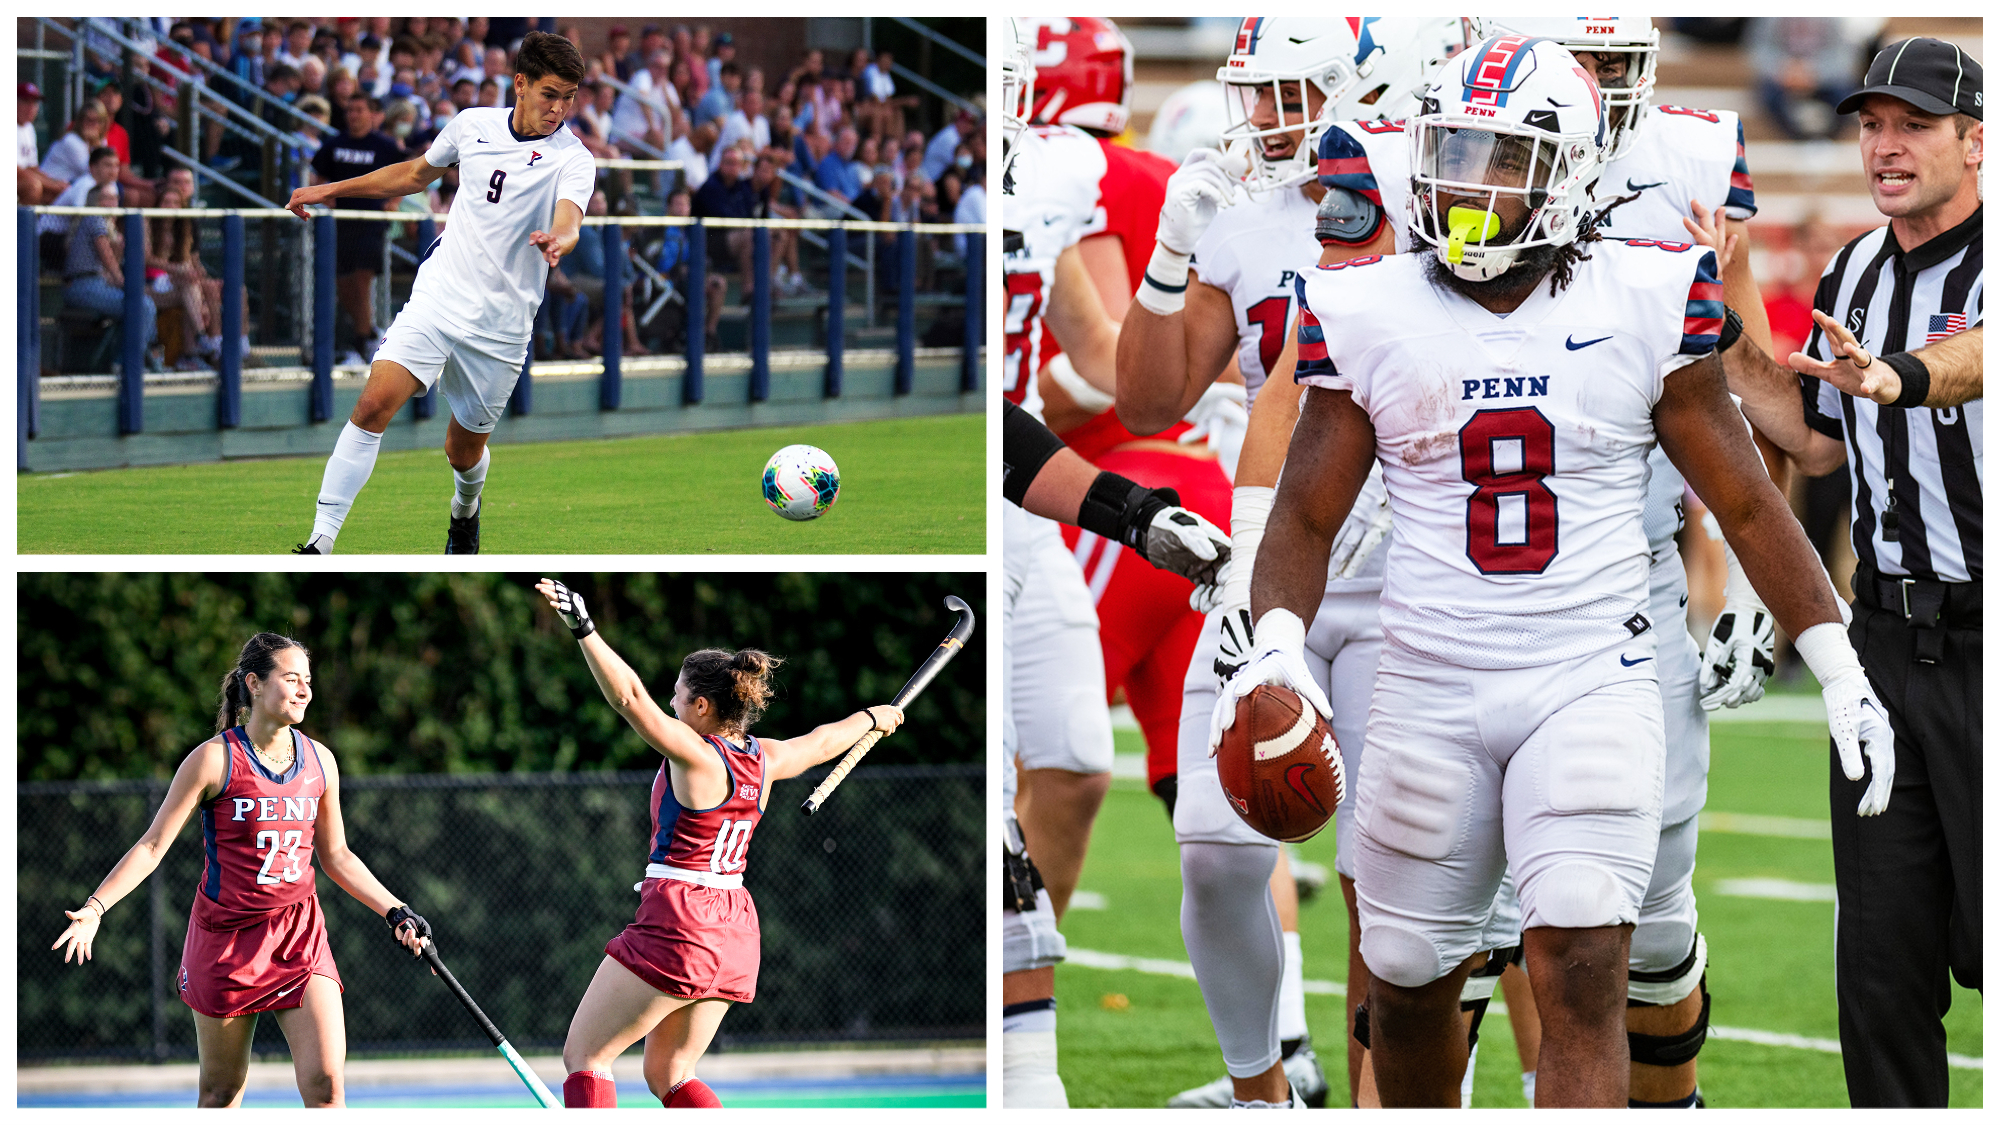 Ben Stitz of the men’s soccer team (top), Livia Loozen of the field hockey team (bottom, at left), and Trey Flowers of the football team (right).